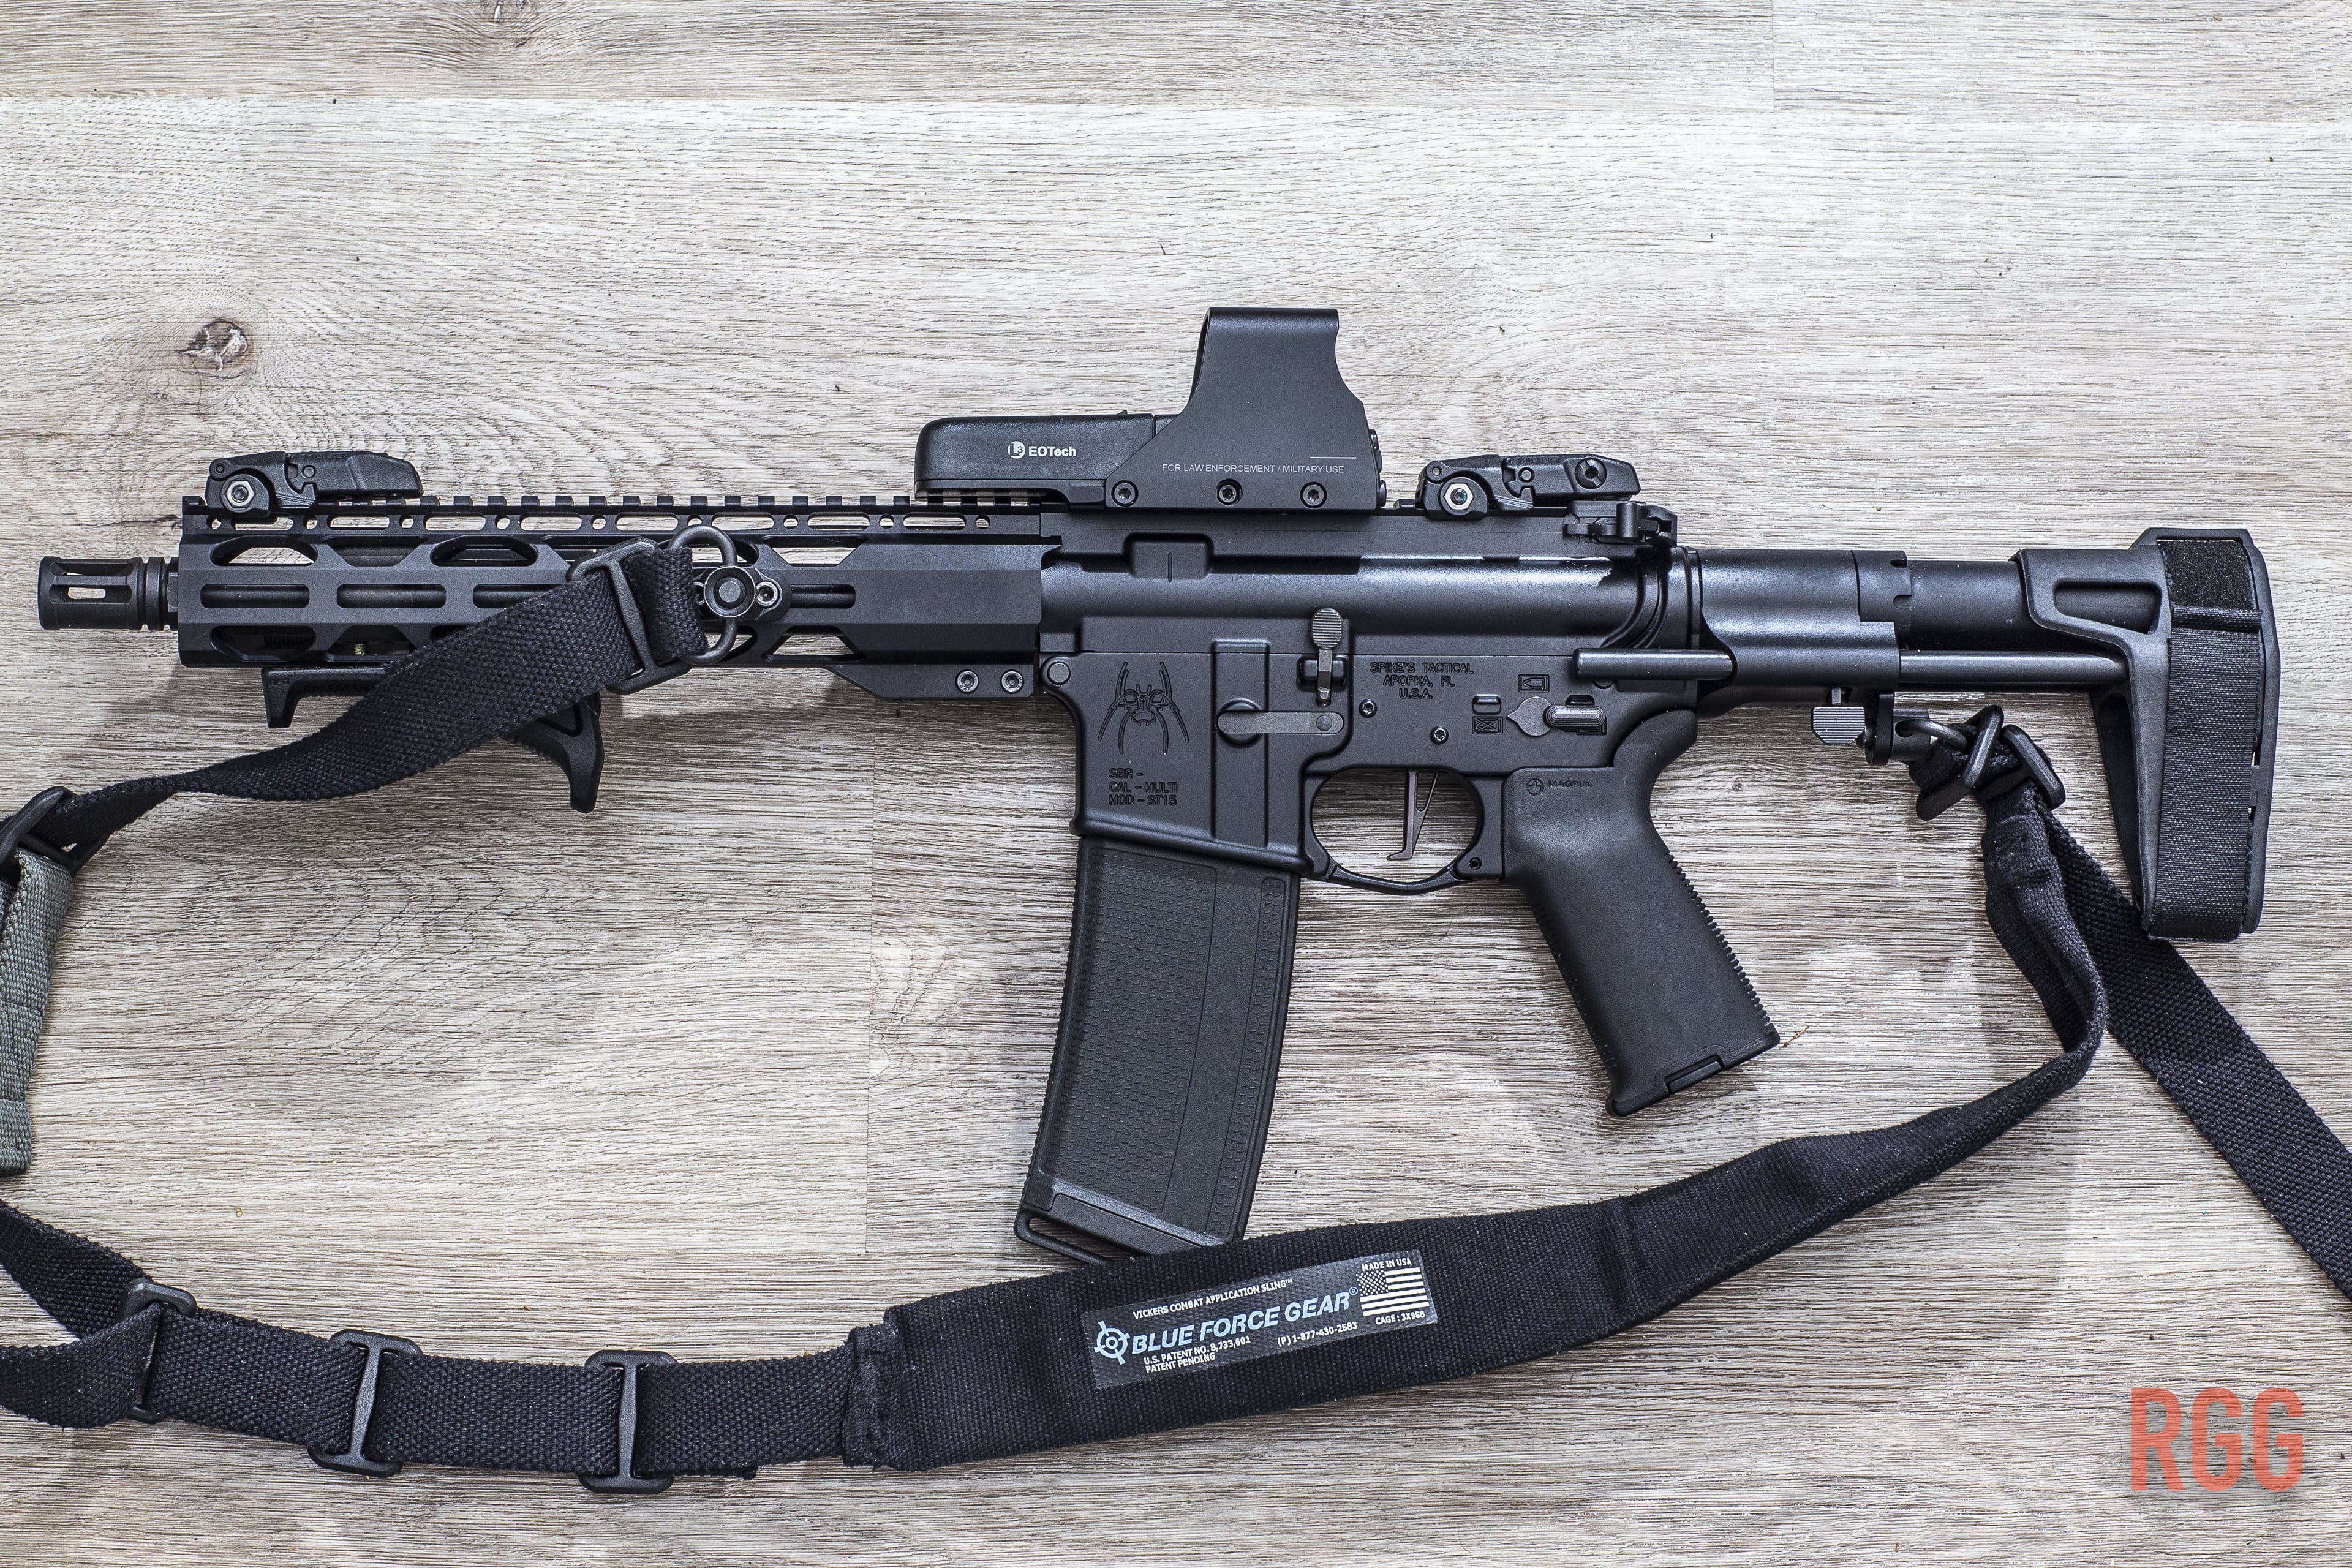 An AR-15 pistol waiting to be rattlecanned.